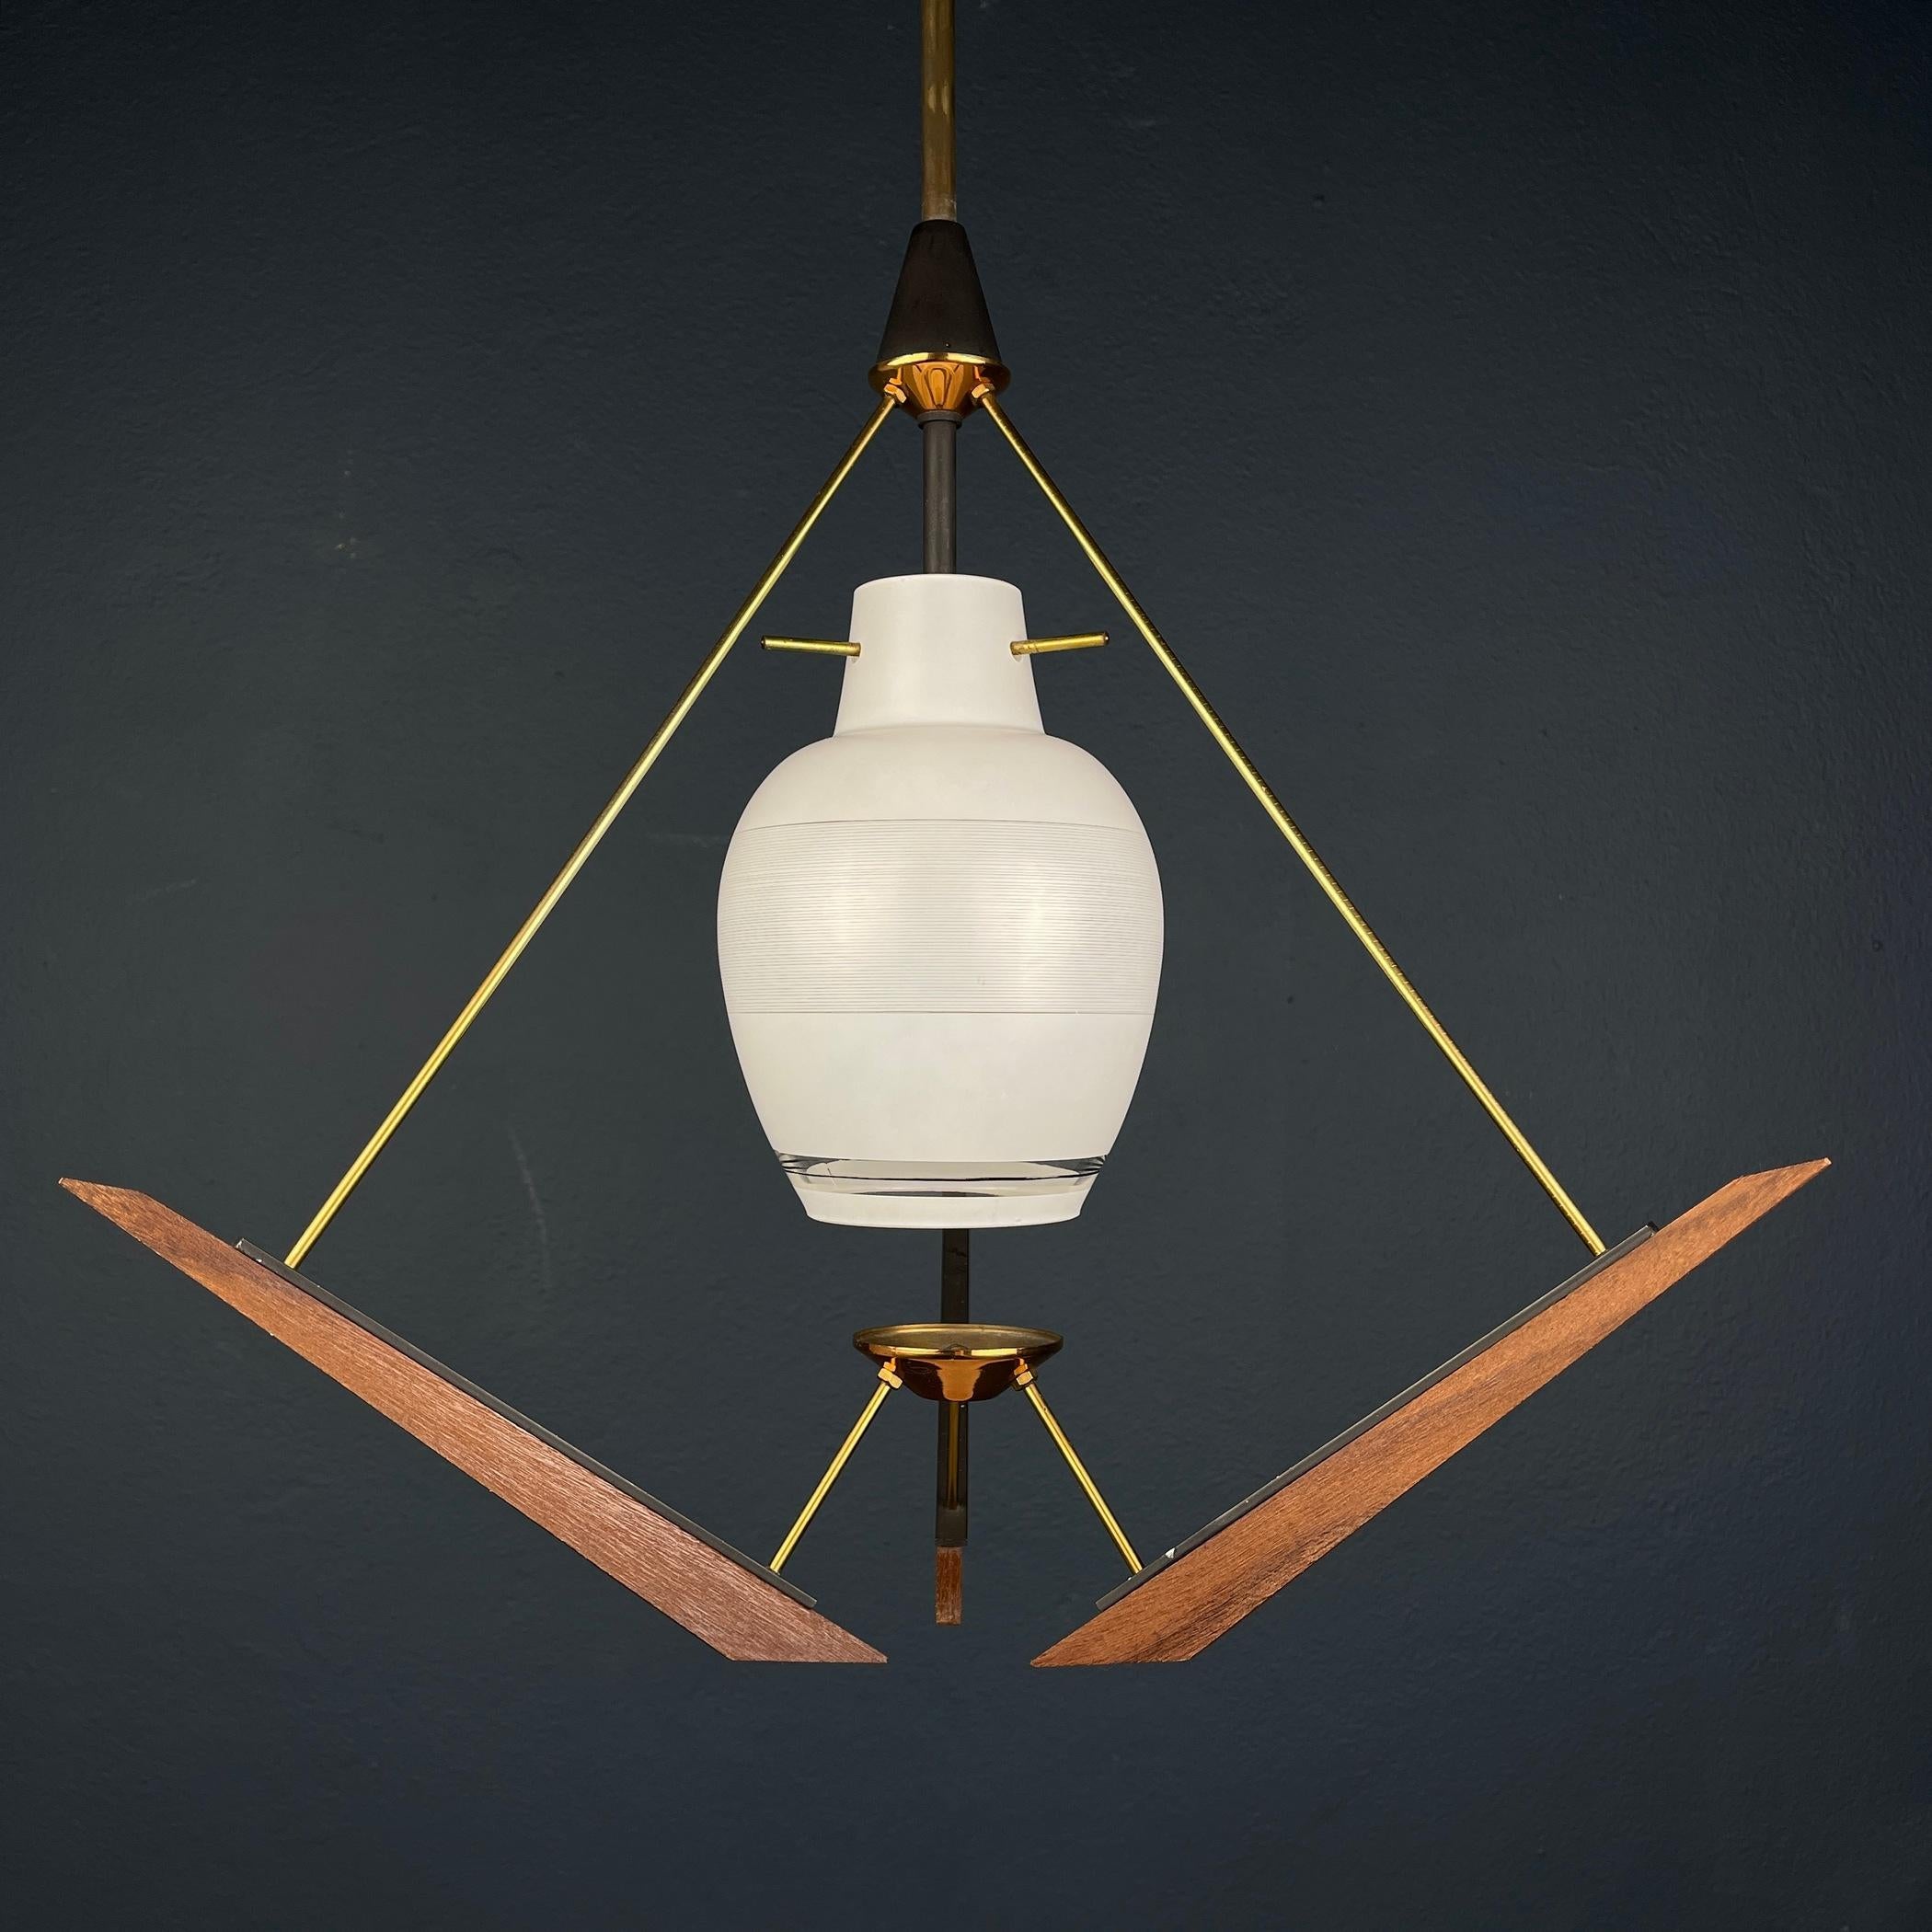 Illuminate your space with the charm of mid-century Italian design through this exquisite Vintage Pendant Lamp crafted by Stilnovo in Italy during the 1970s. This piece represents the epitome of mid-century Italian lighting, showcasing a harmonious